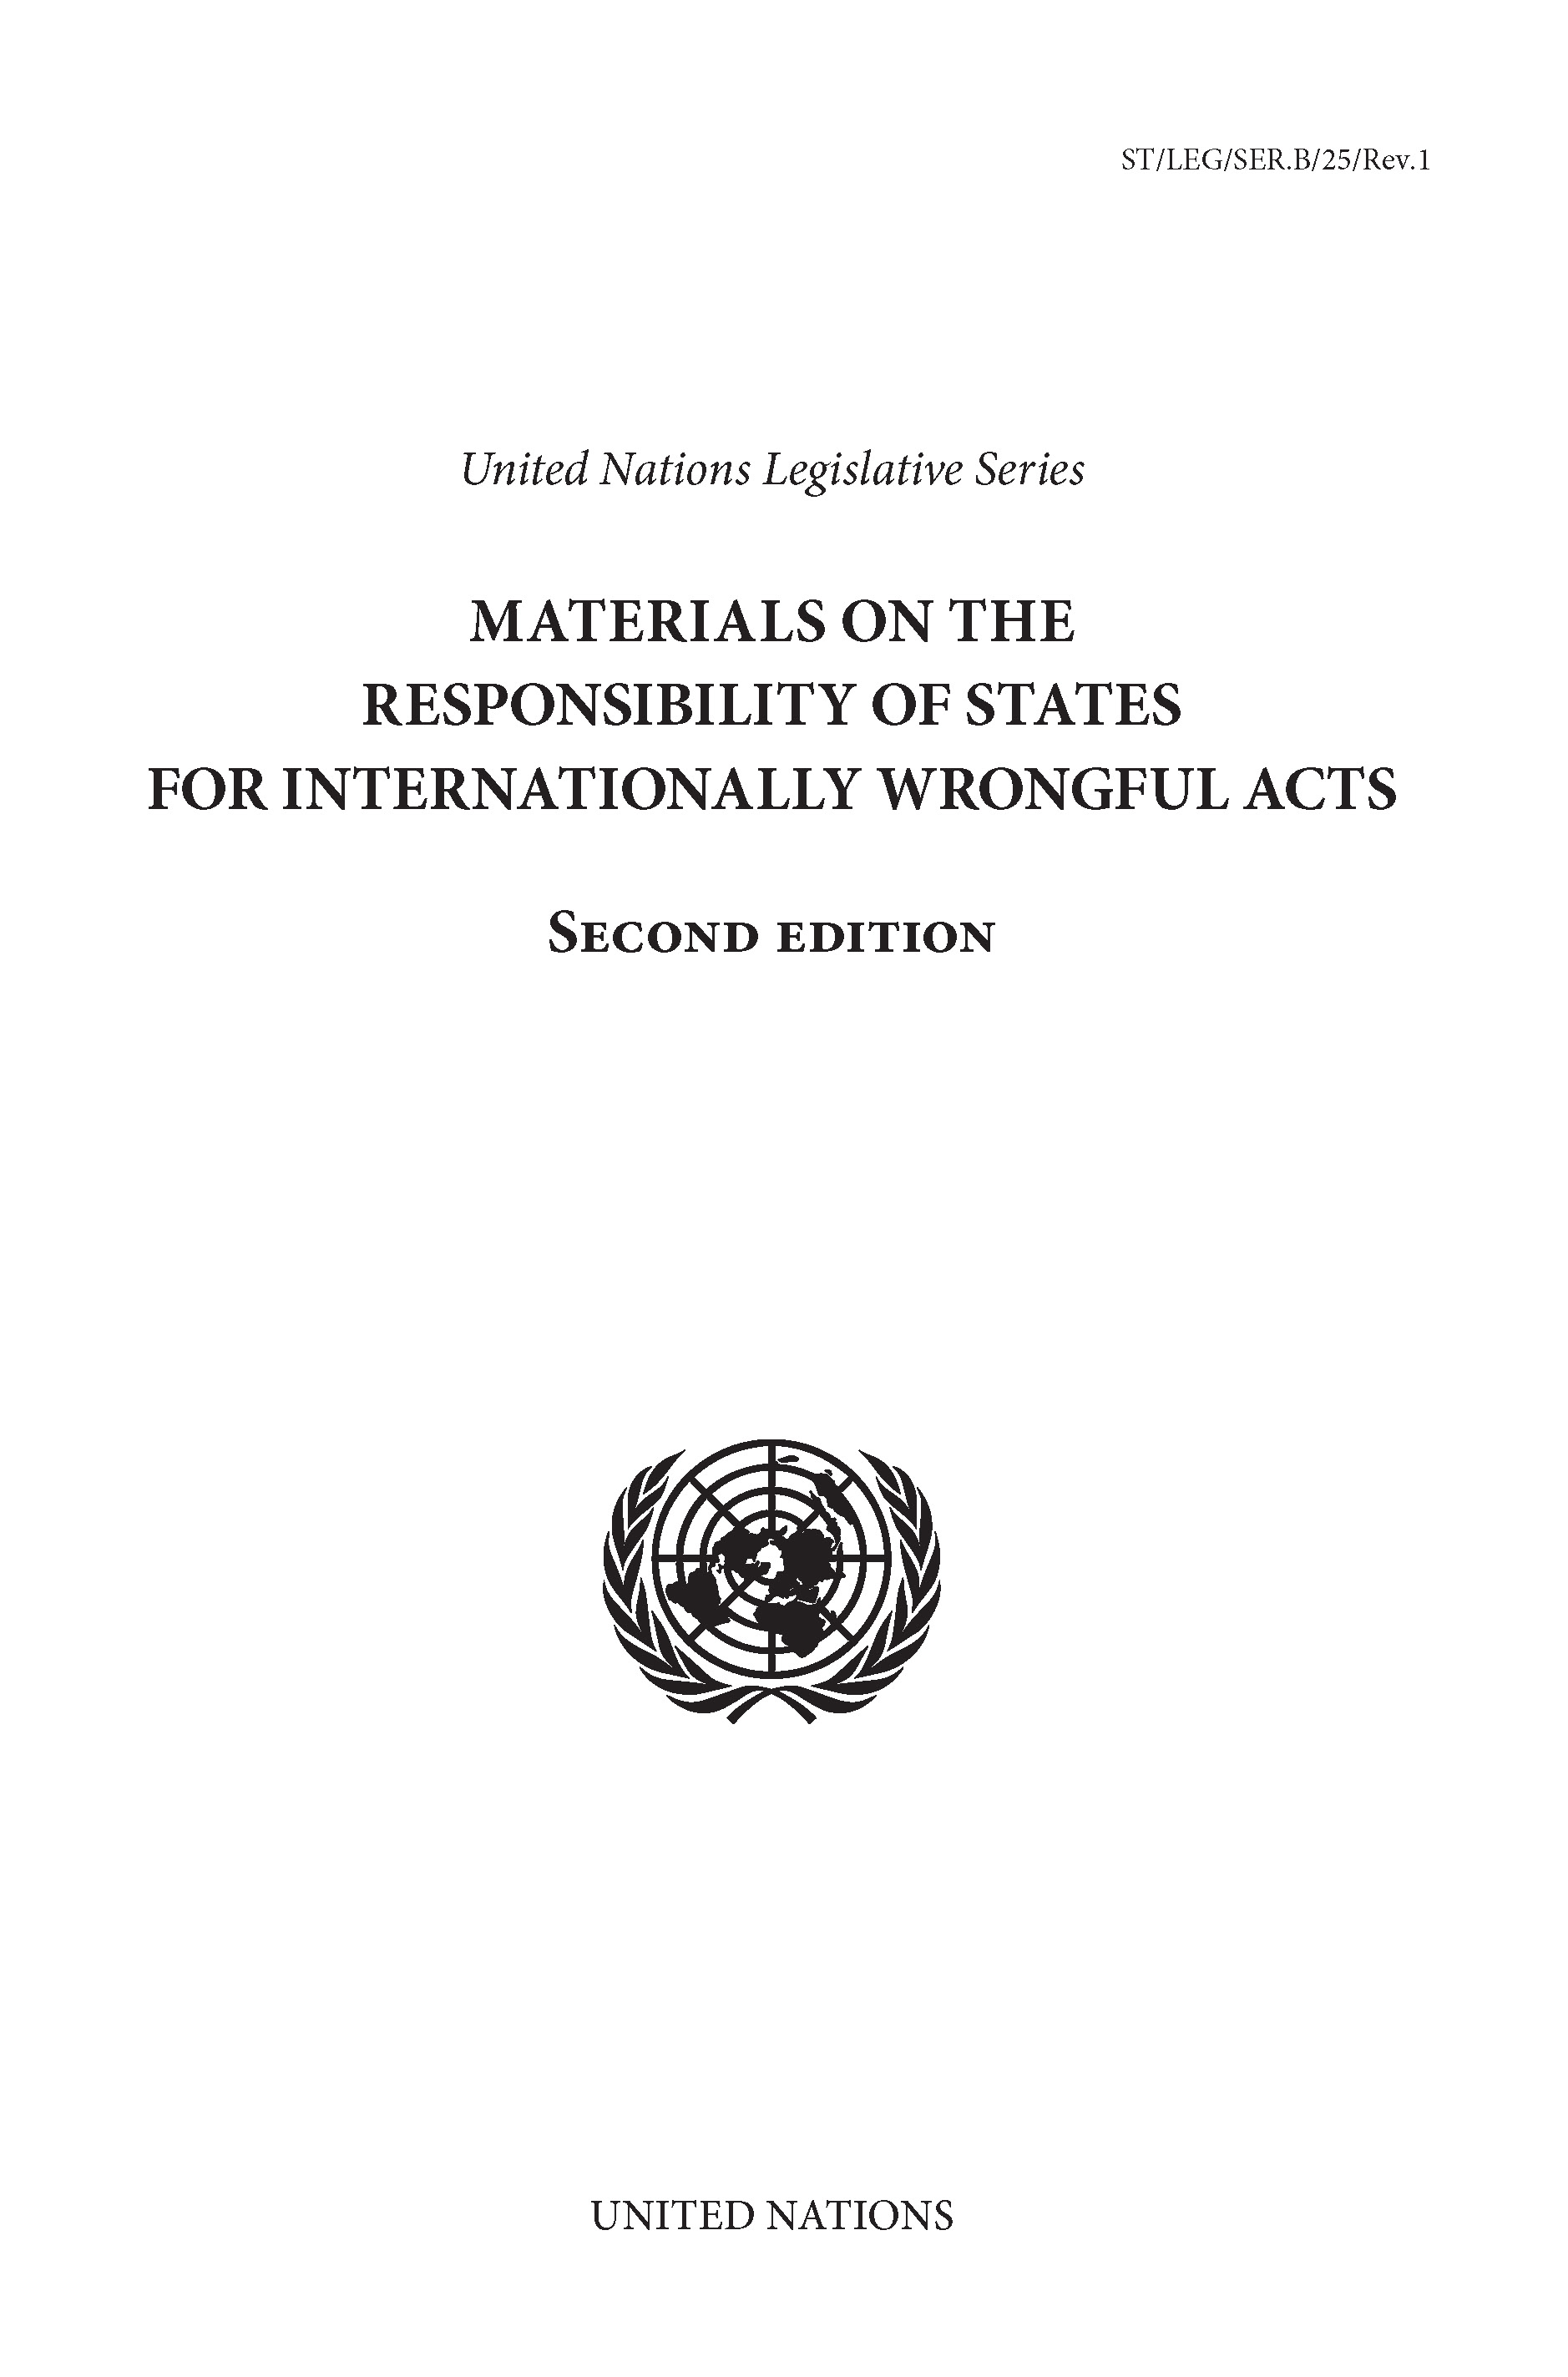 image of Materials on the Responsibility of States for Internationally Wrongful Acts, Second Edition